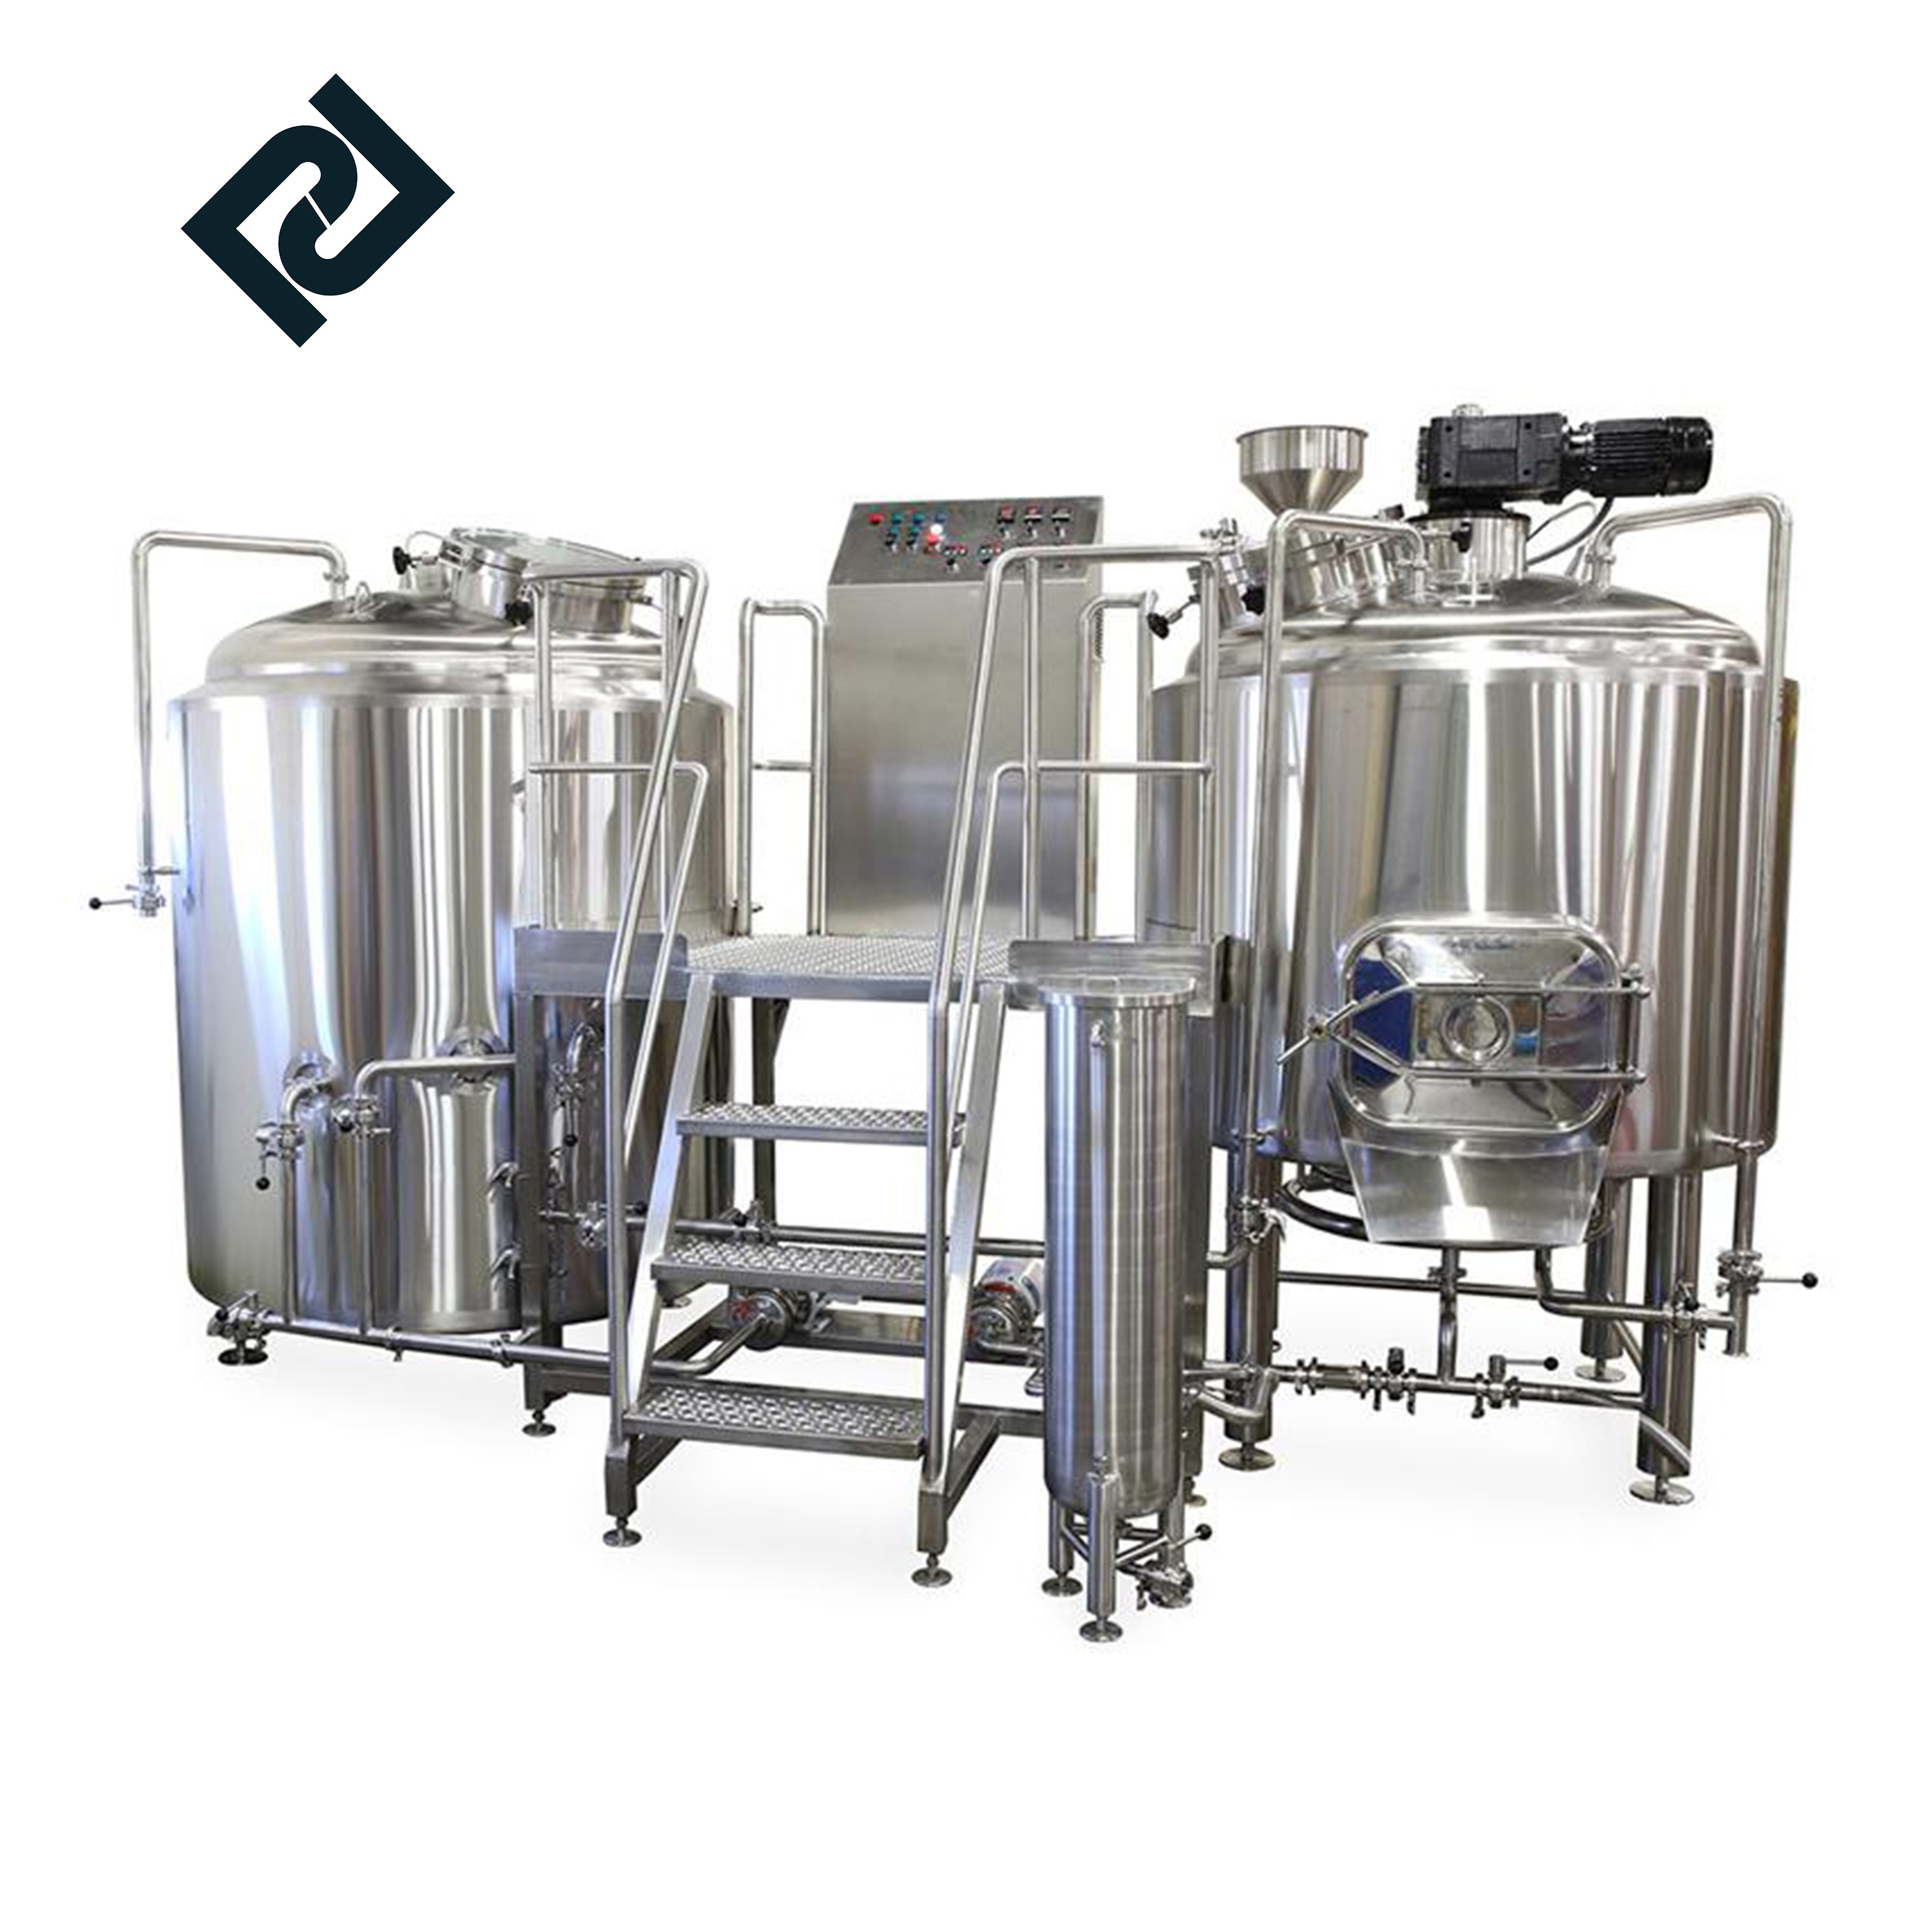 Low MOQ for New Product For Restaurant Brewing - Automatic microbrewery turnkey beer production system1000l beer brewing equipment – Pijiang